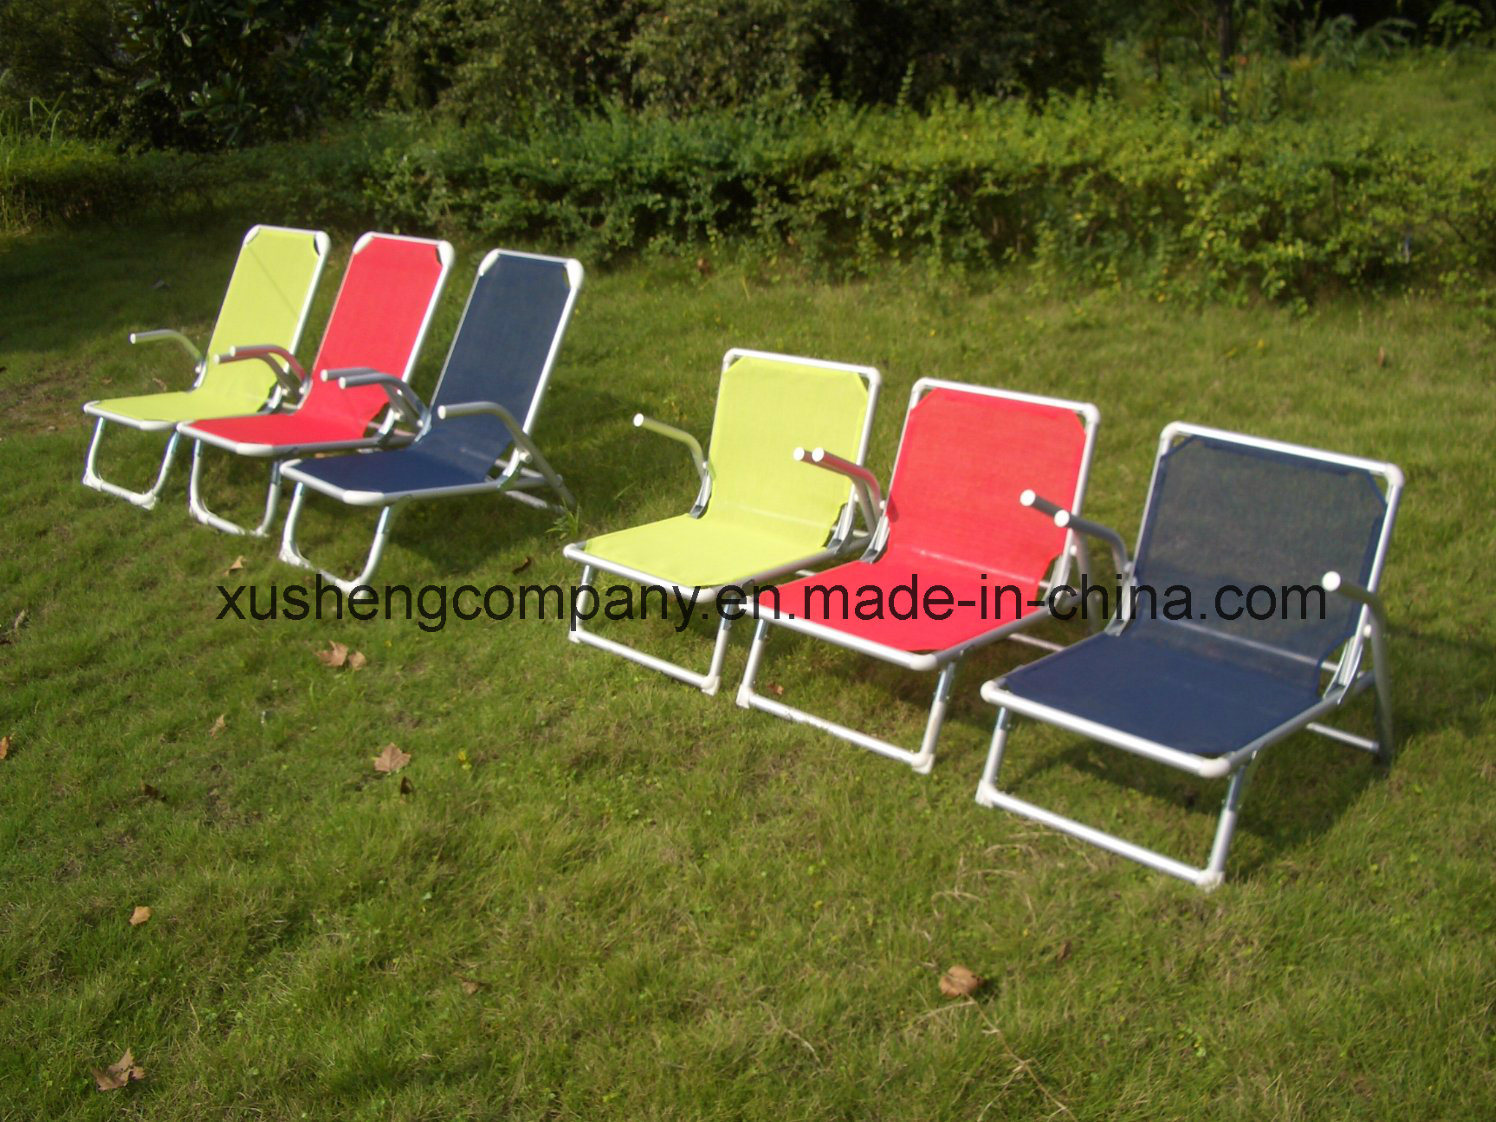 Foldable Chair Collapsible Chair Folding Chair